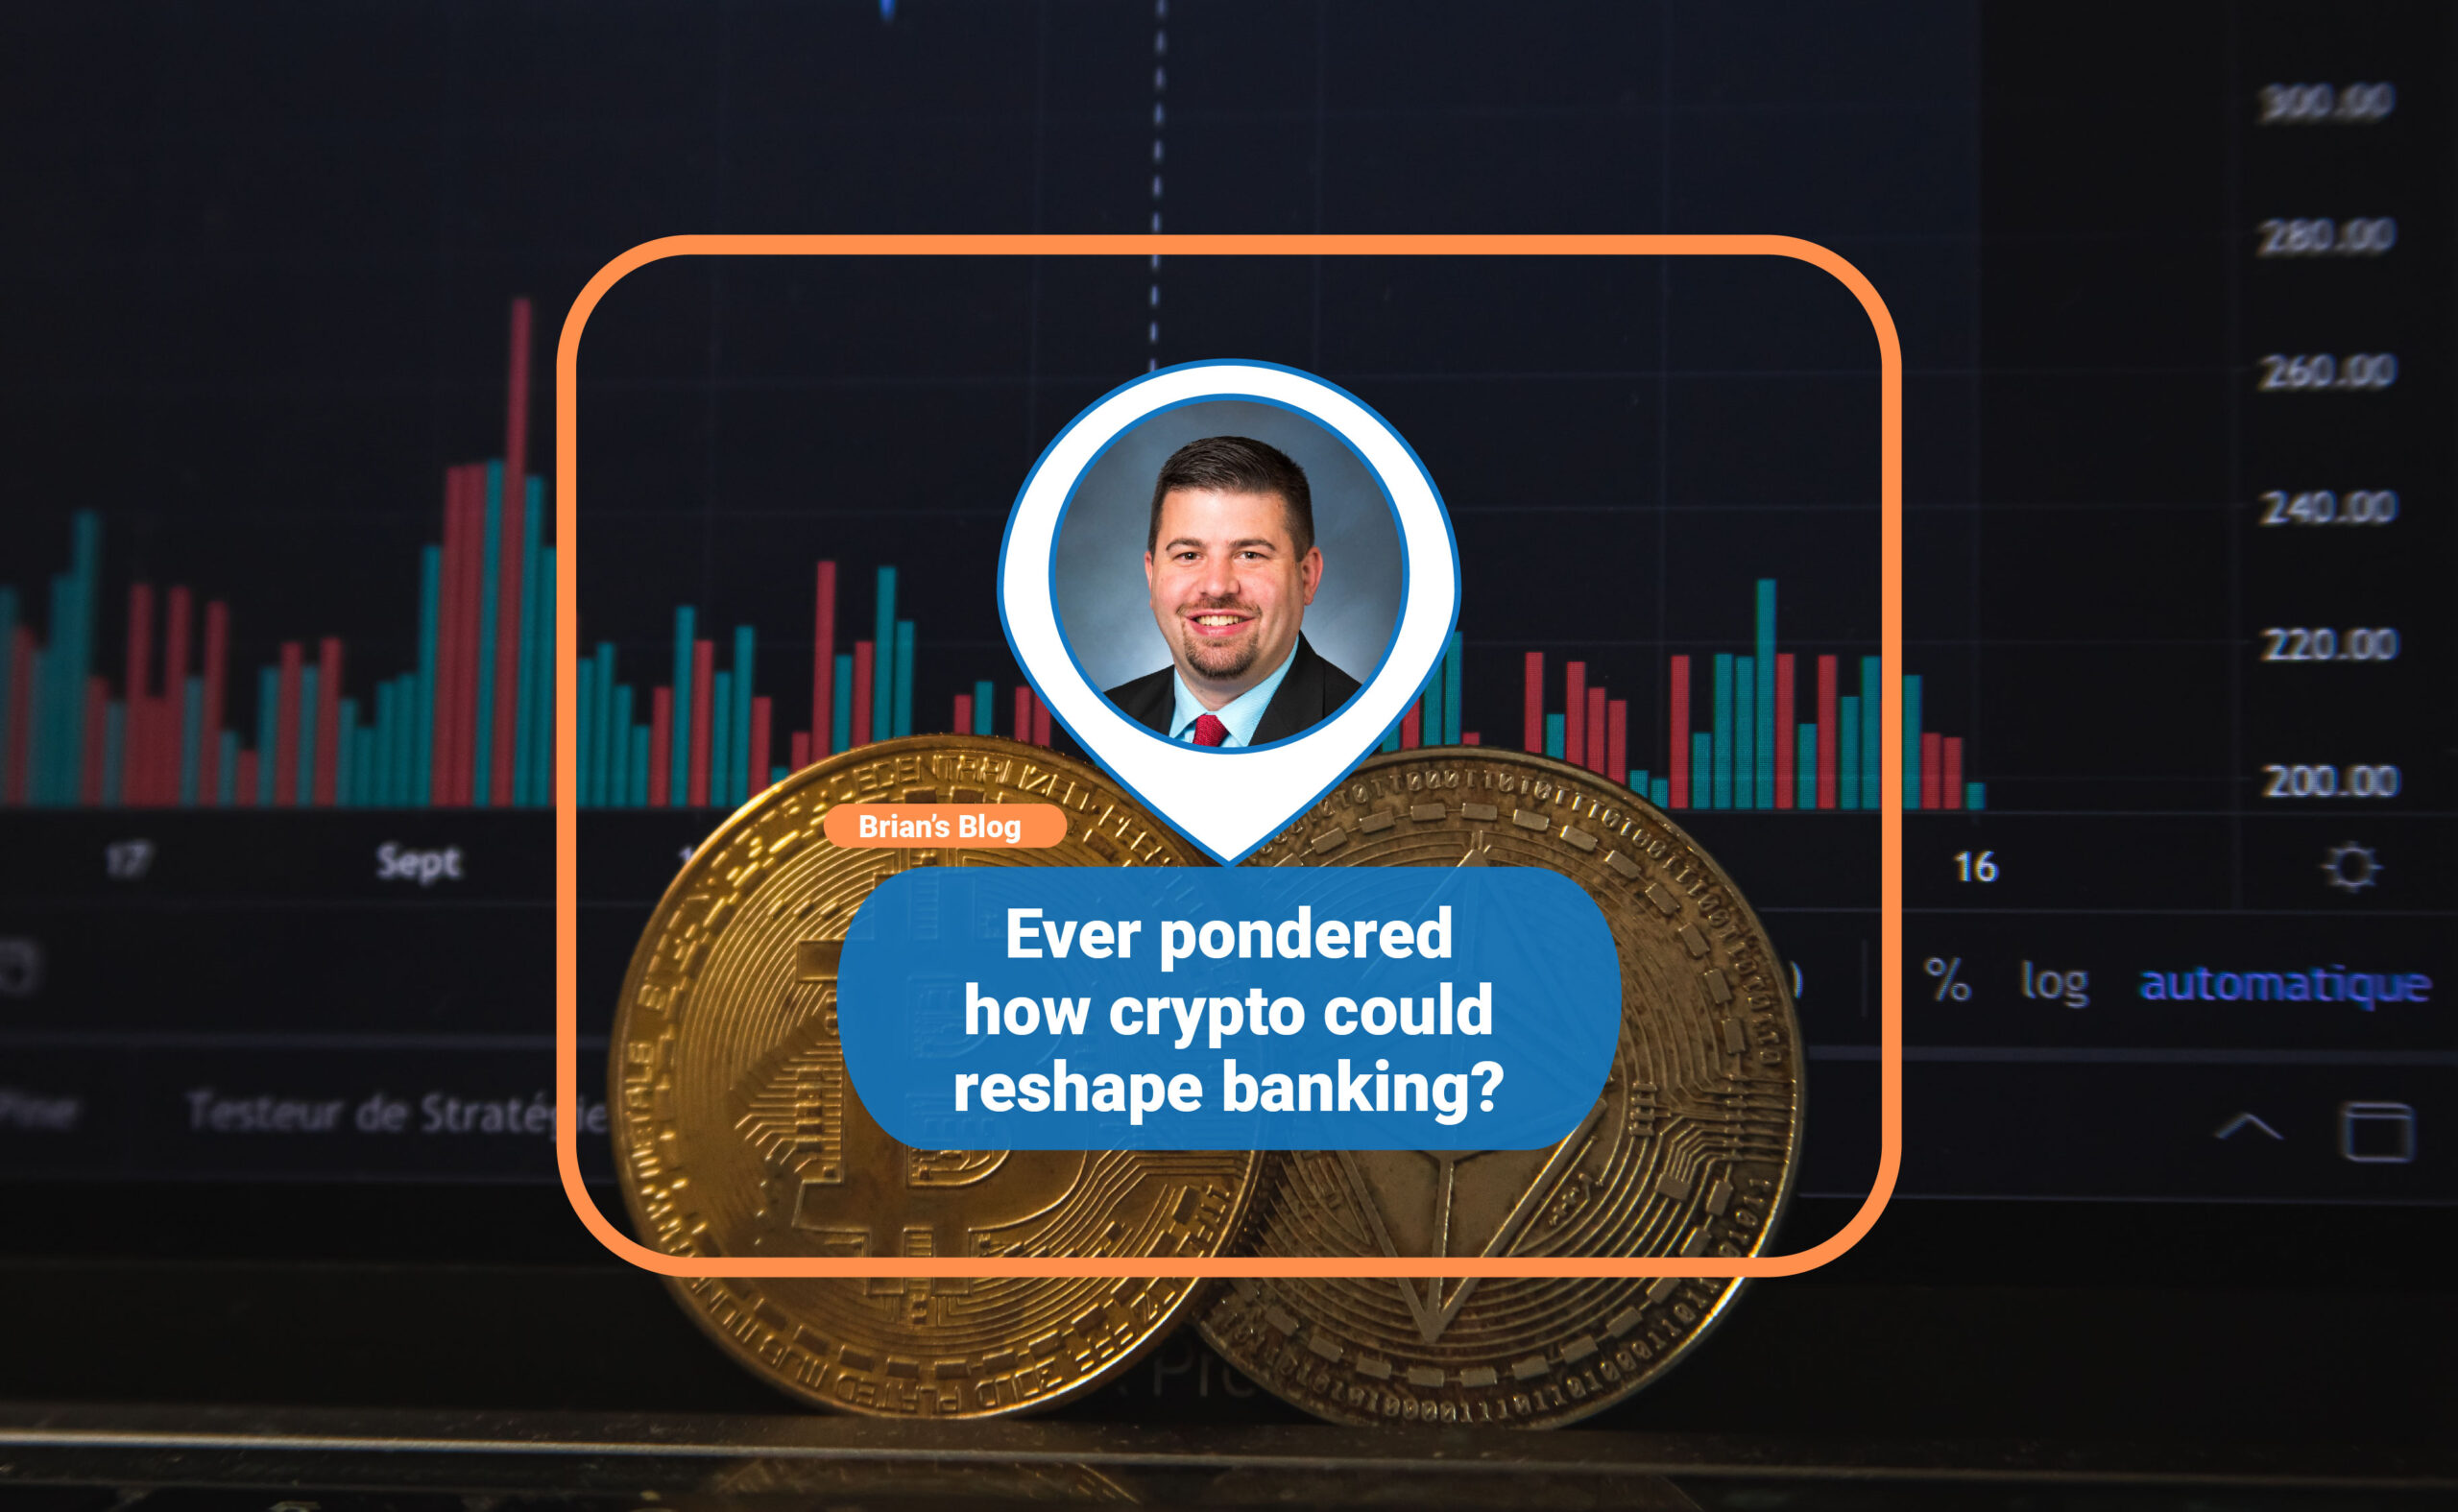 Ever pondered how crypto could reshape banking? 🤔